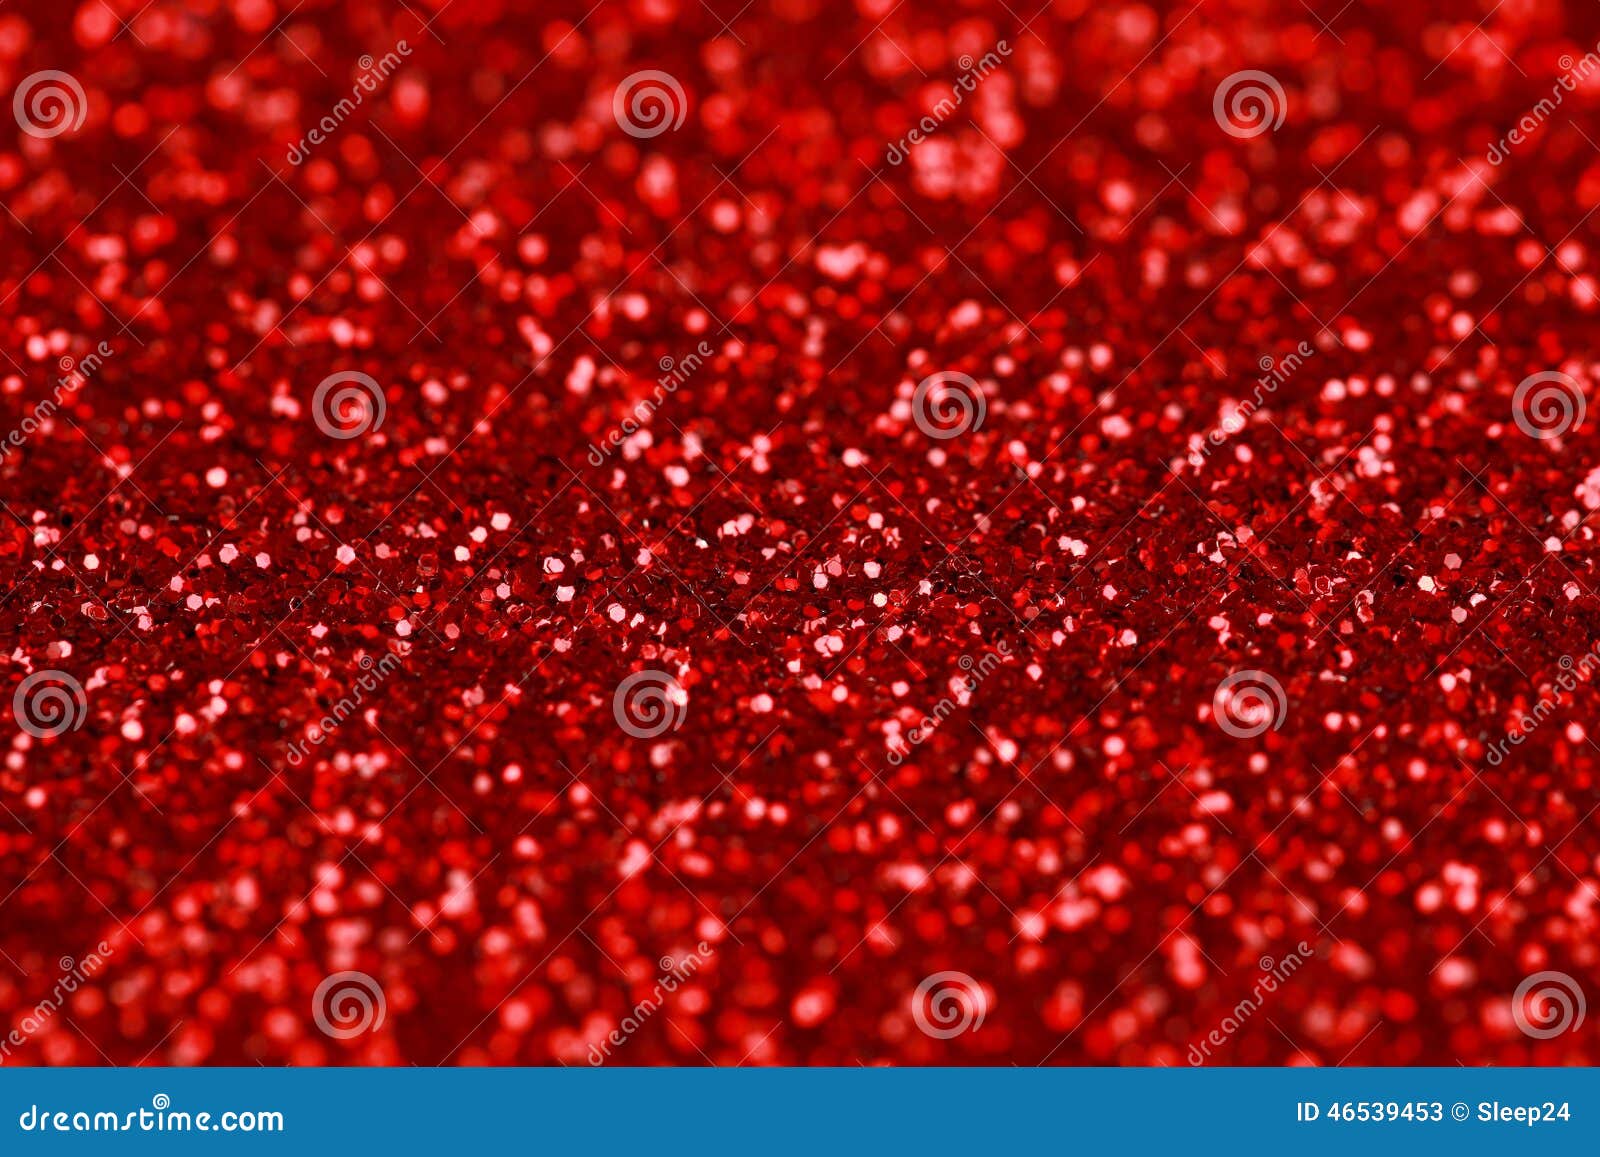 Red Sparkle Glitter Background. Holiday, Christmas, Valentines ...